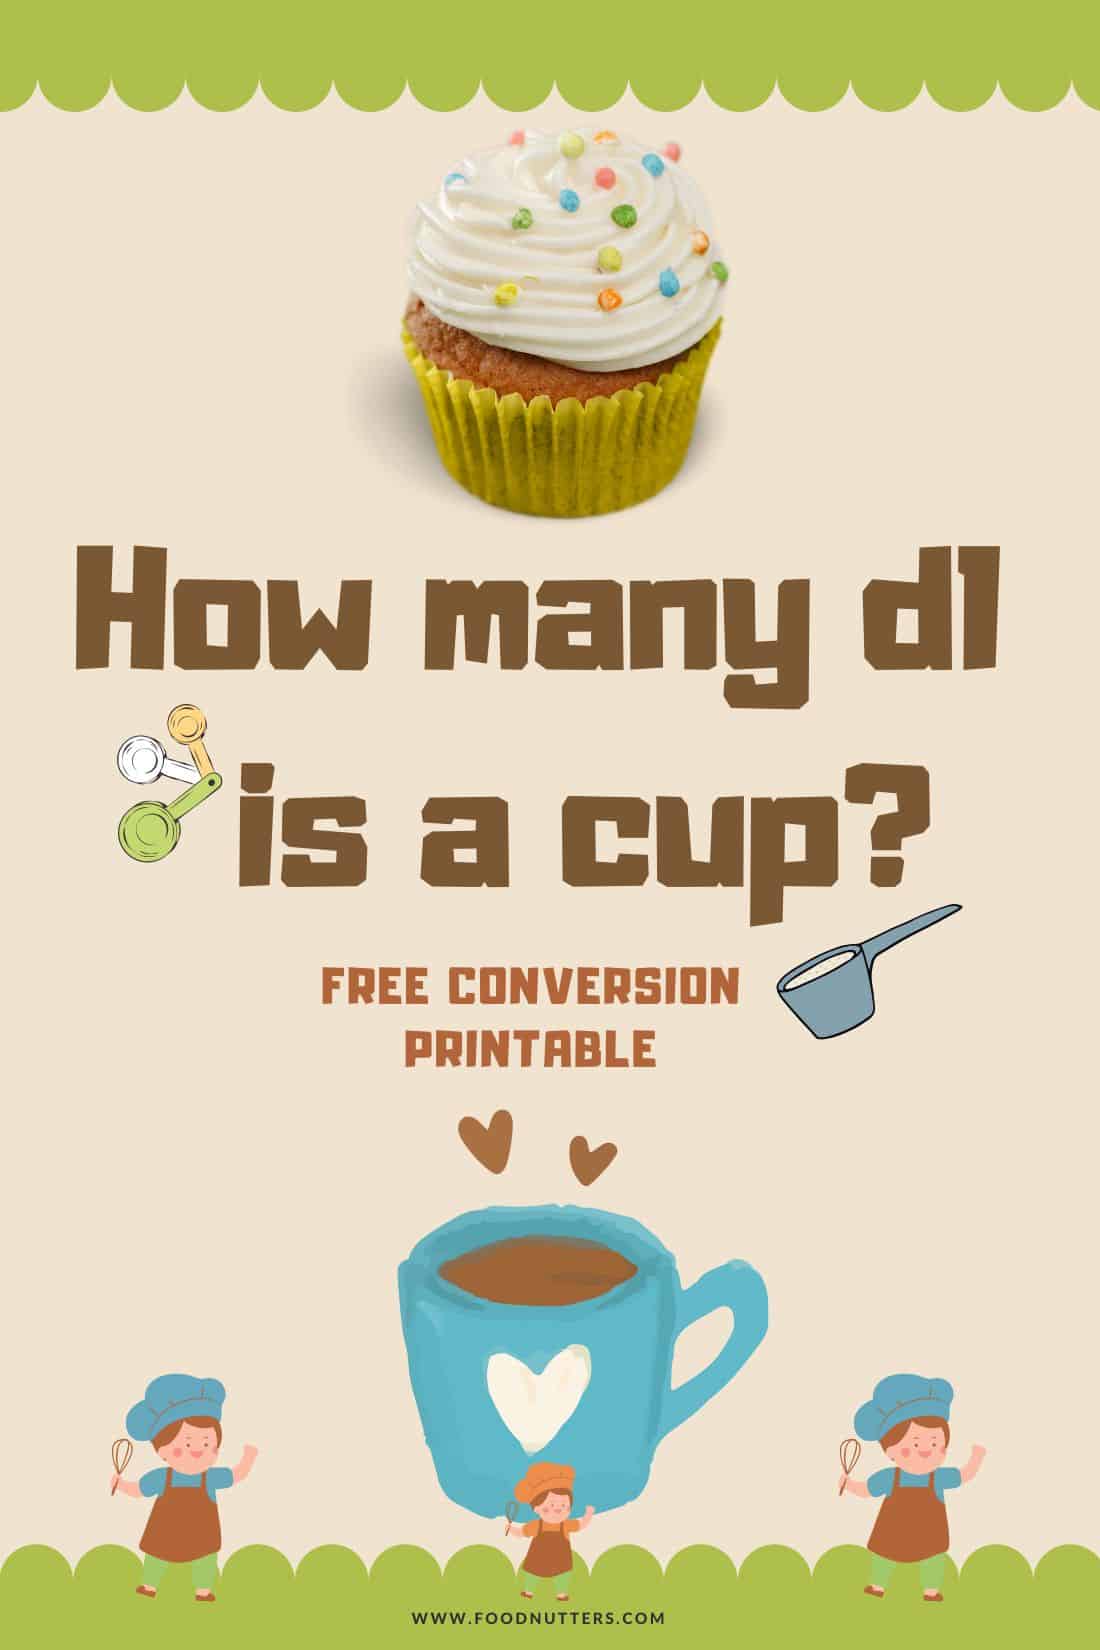 How to convert a cup to dl ~ Food Nutters